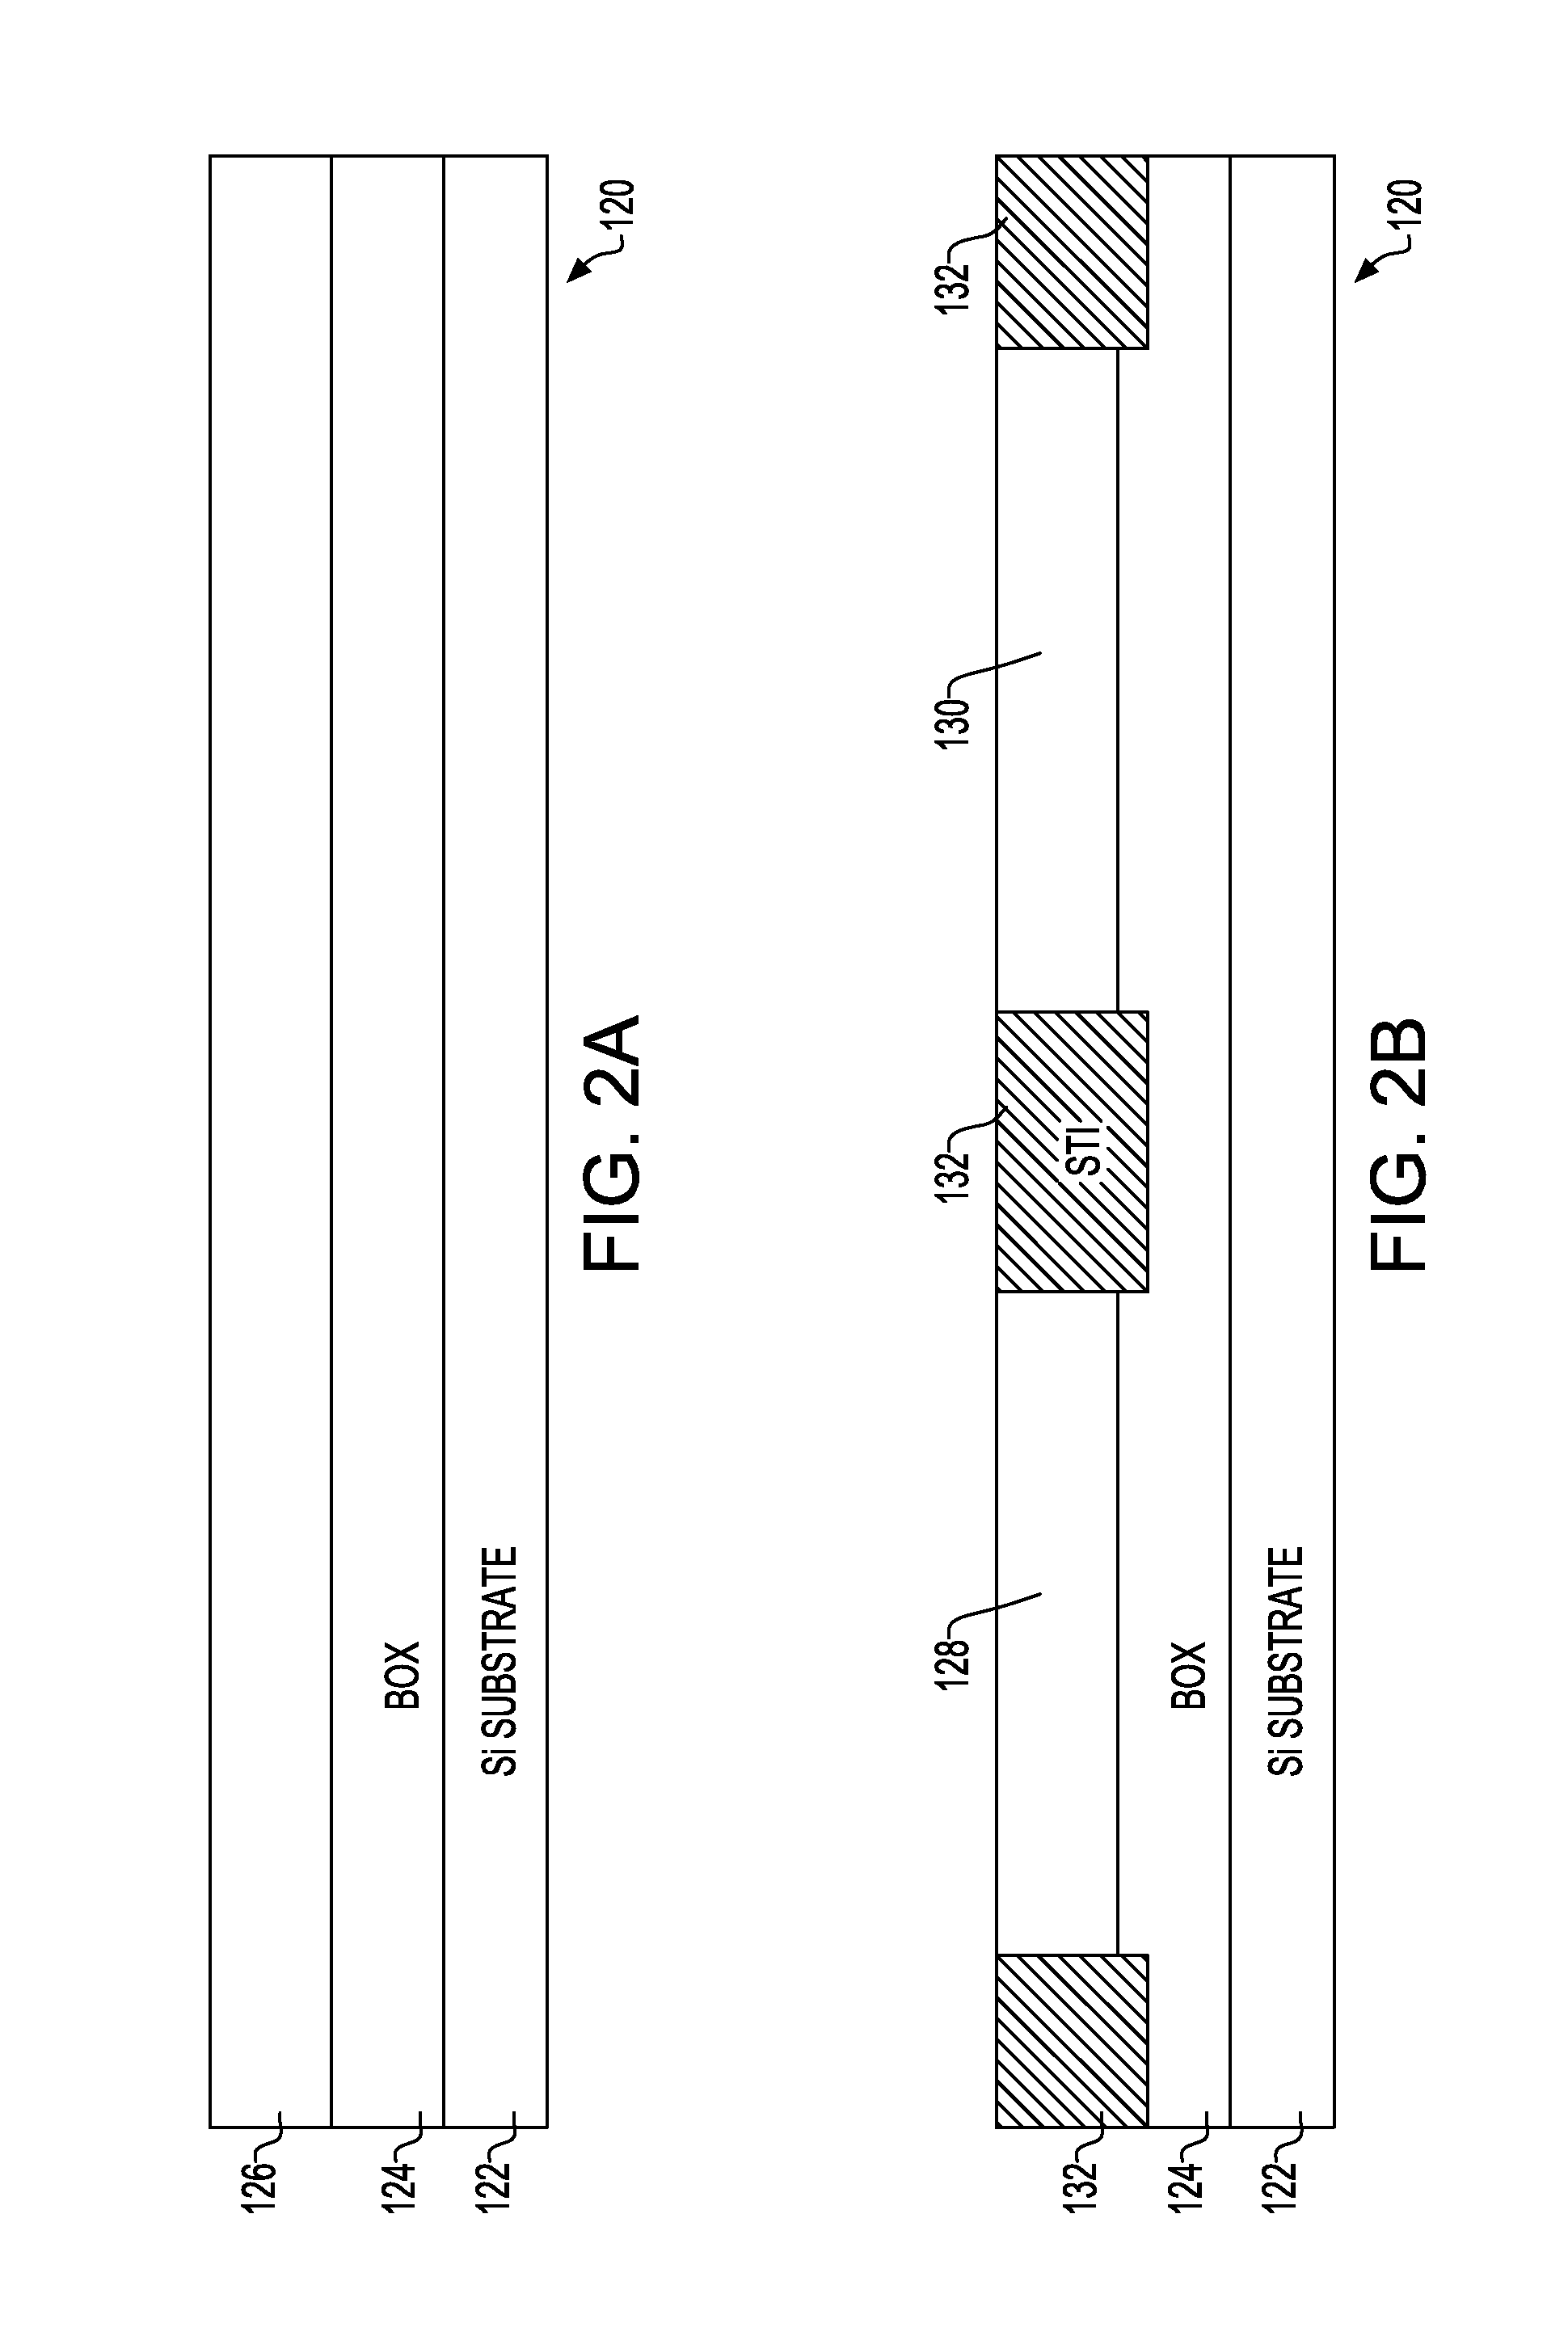 Integrated circuit (IC) chip having both metal and silicon gate field effect transistors (FETs) and method of manufacture